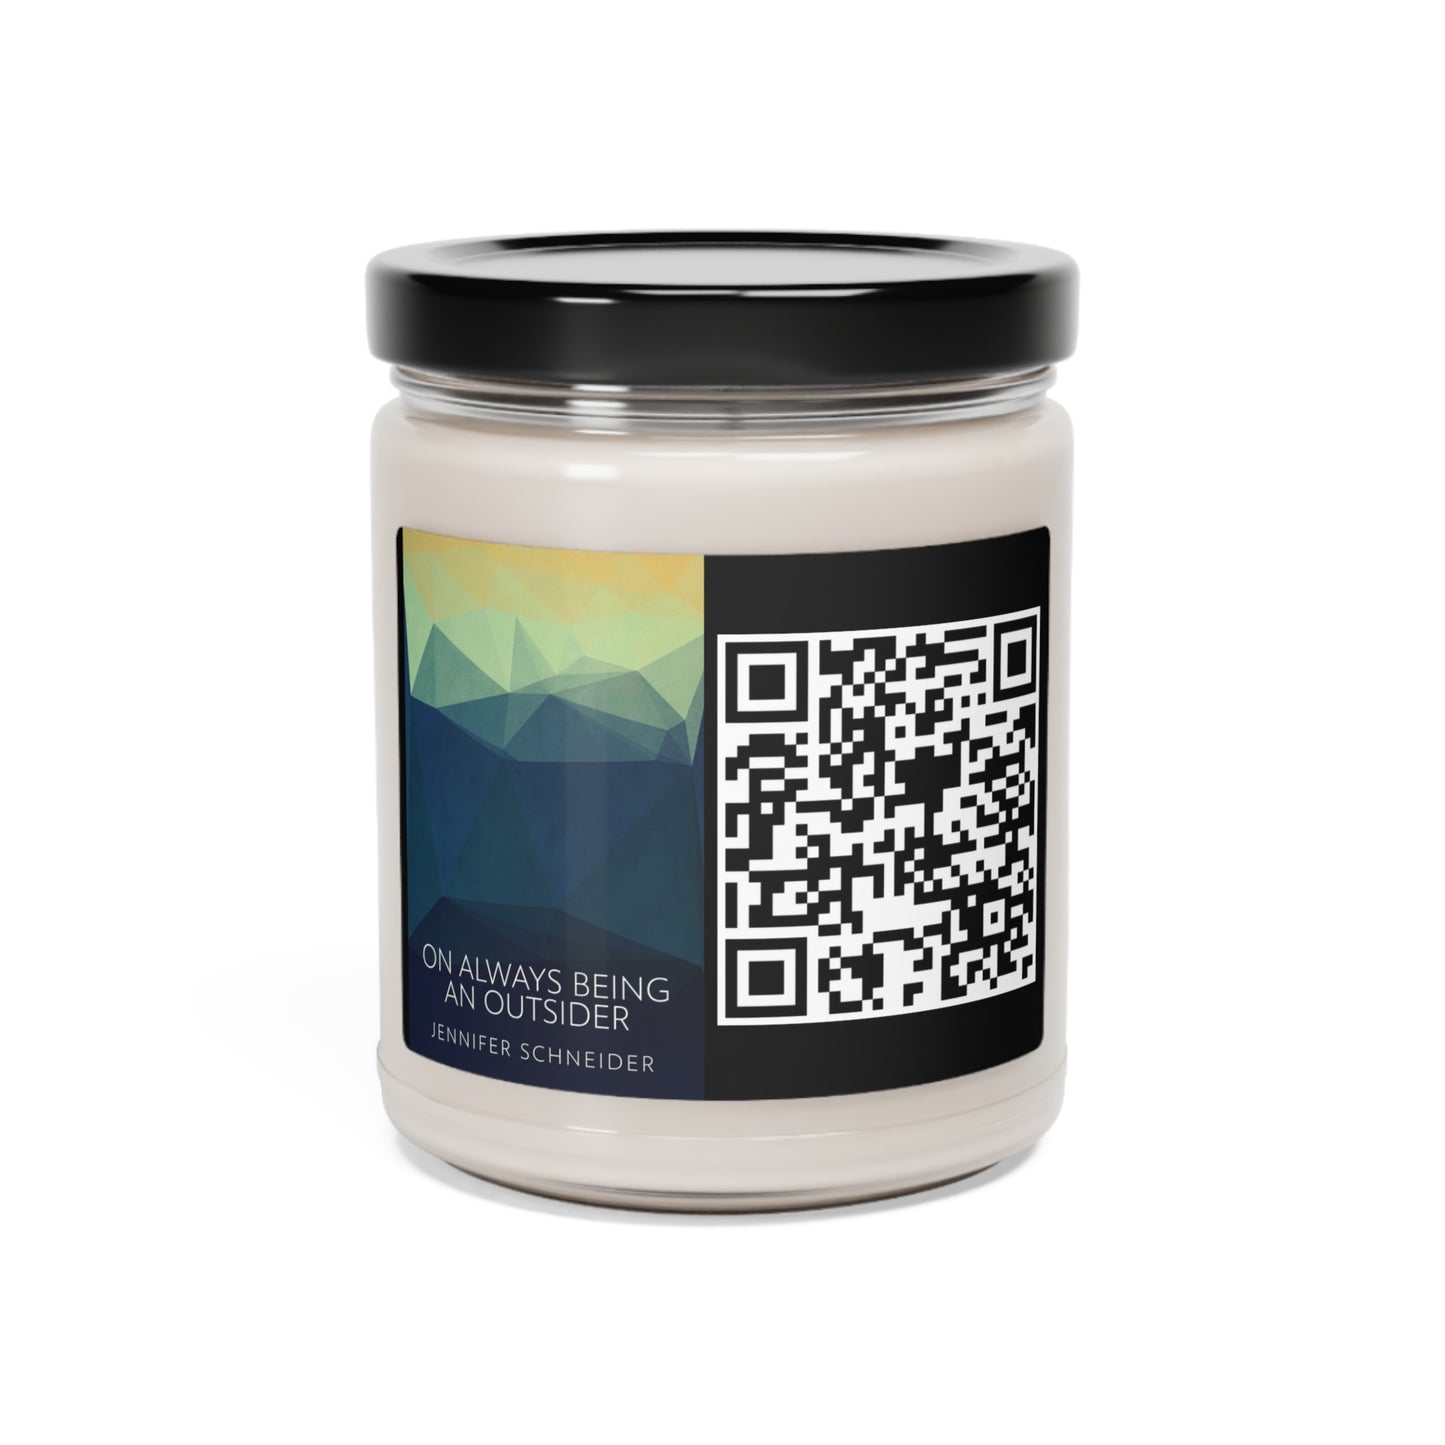 On Always Being An Outsider - Scented Soy Candle